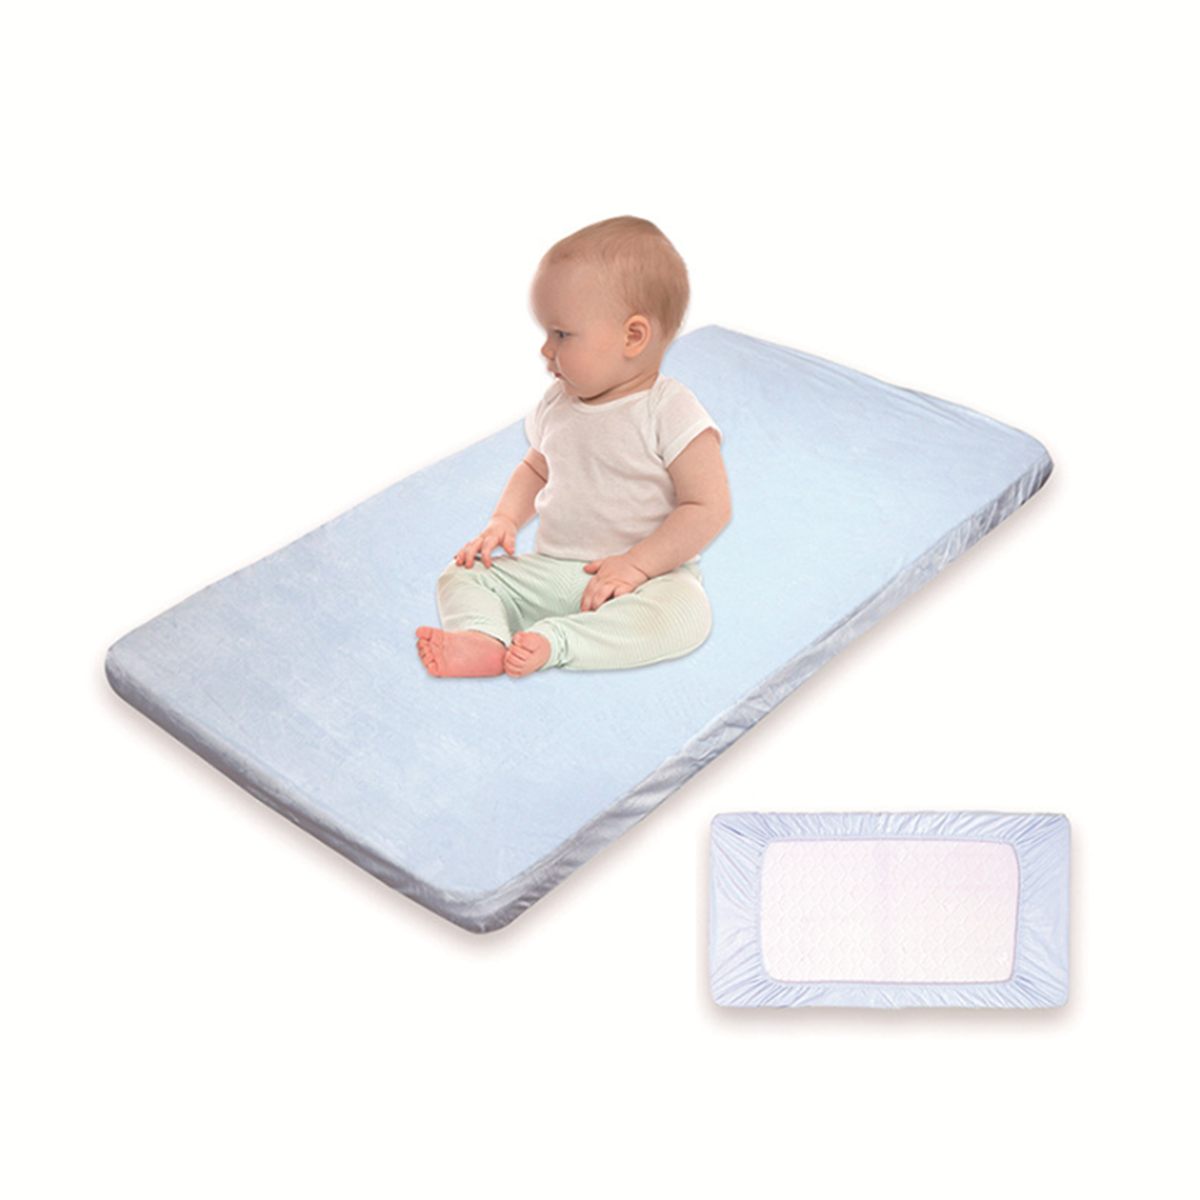 130x70 cm Baby Peuter Beddengoed Suface Baby Soft Comfort Wieg Matrashoes